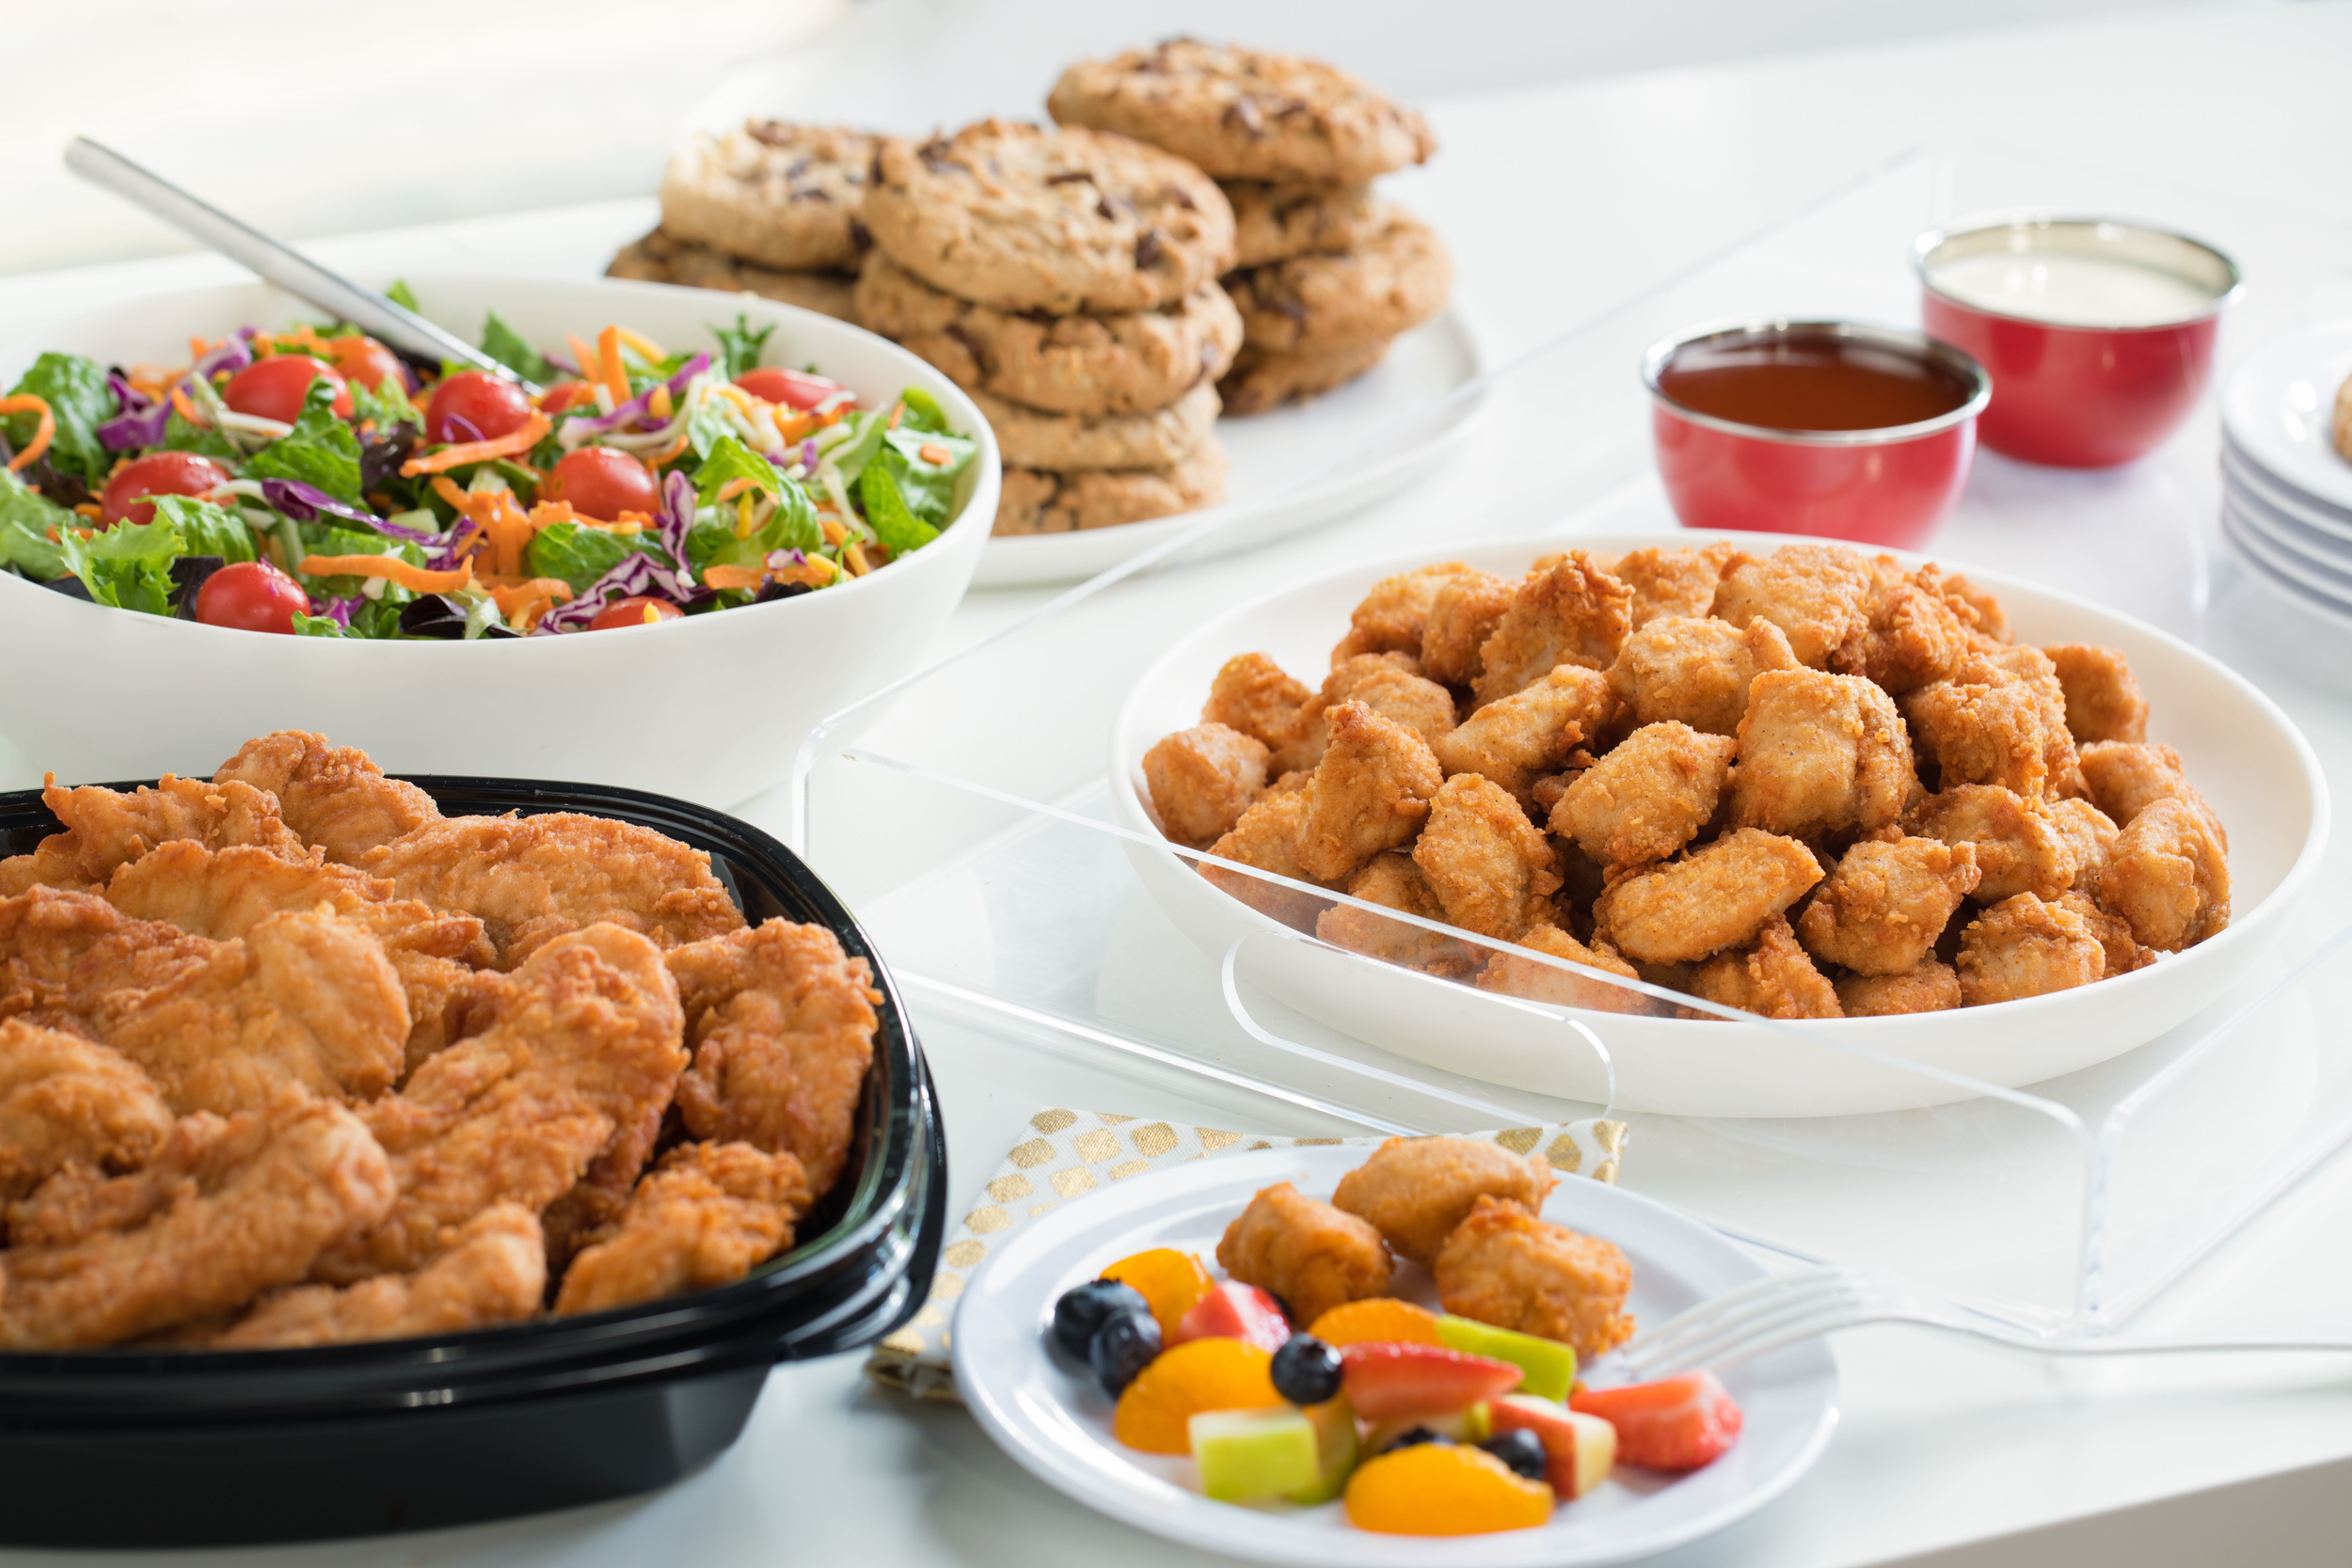 Chick-fil-A strips, nuggets, salad and cookies in serving bowls.